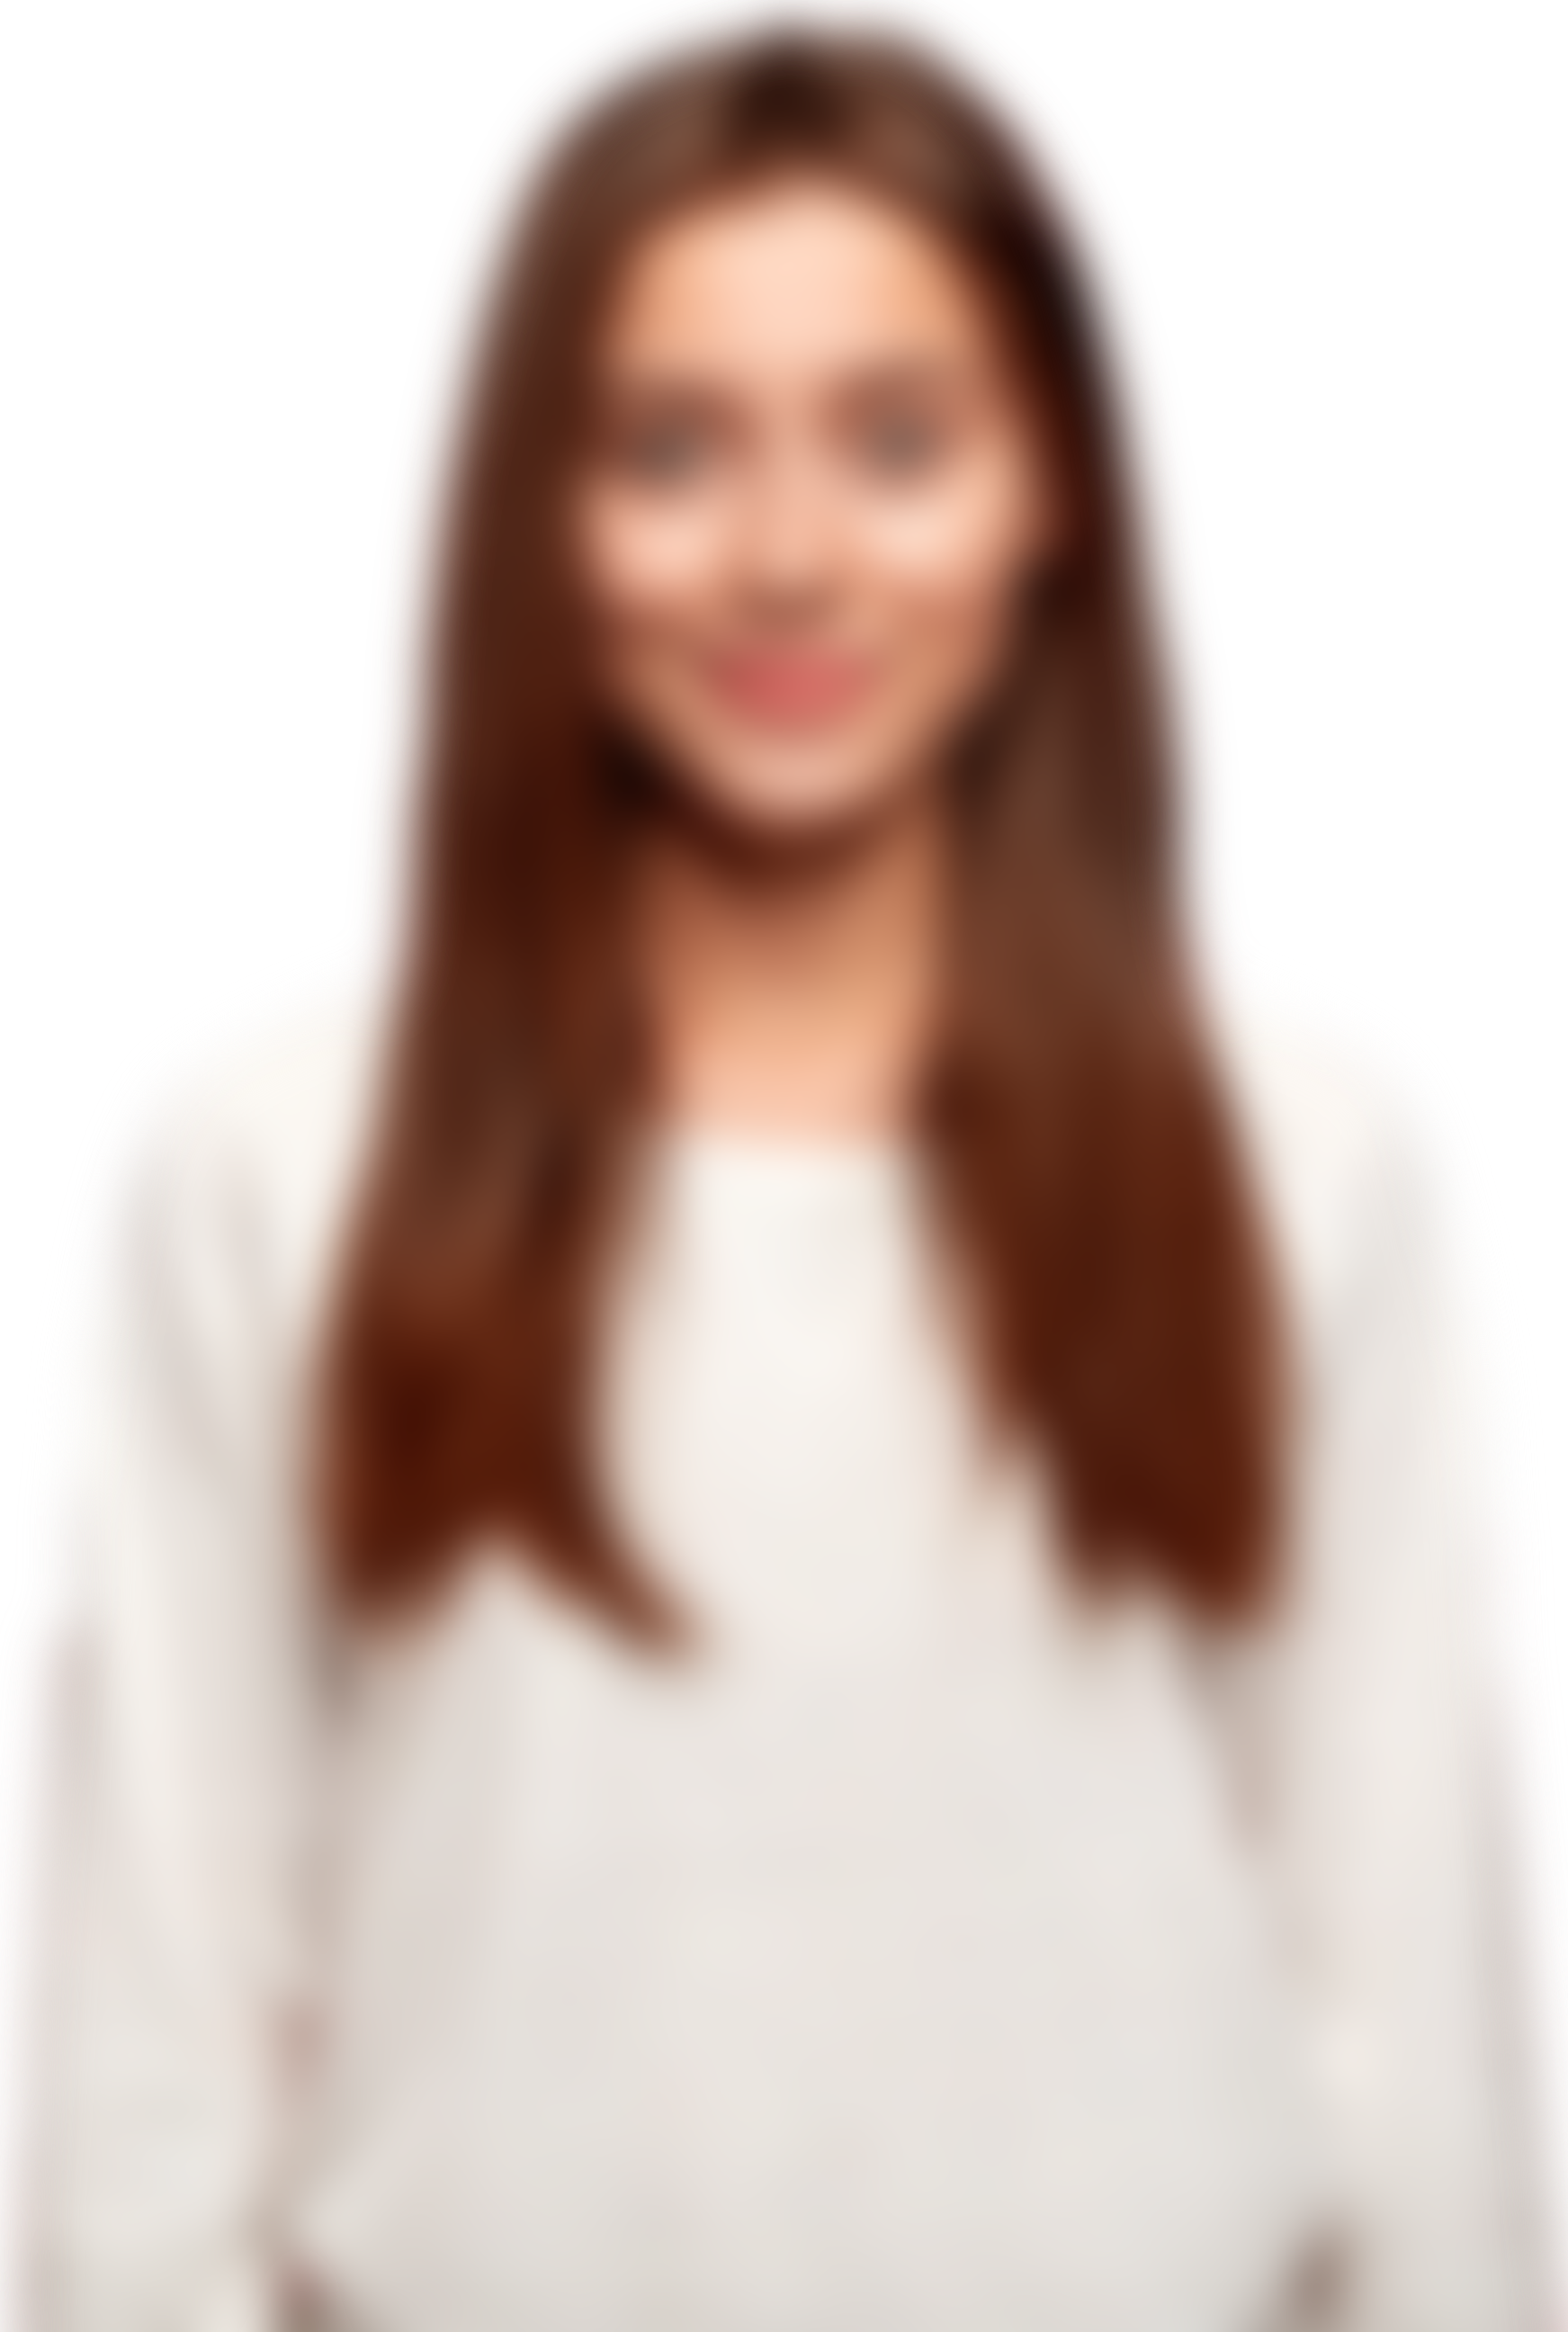 Your photo with transparent background